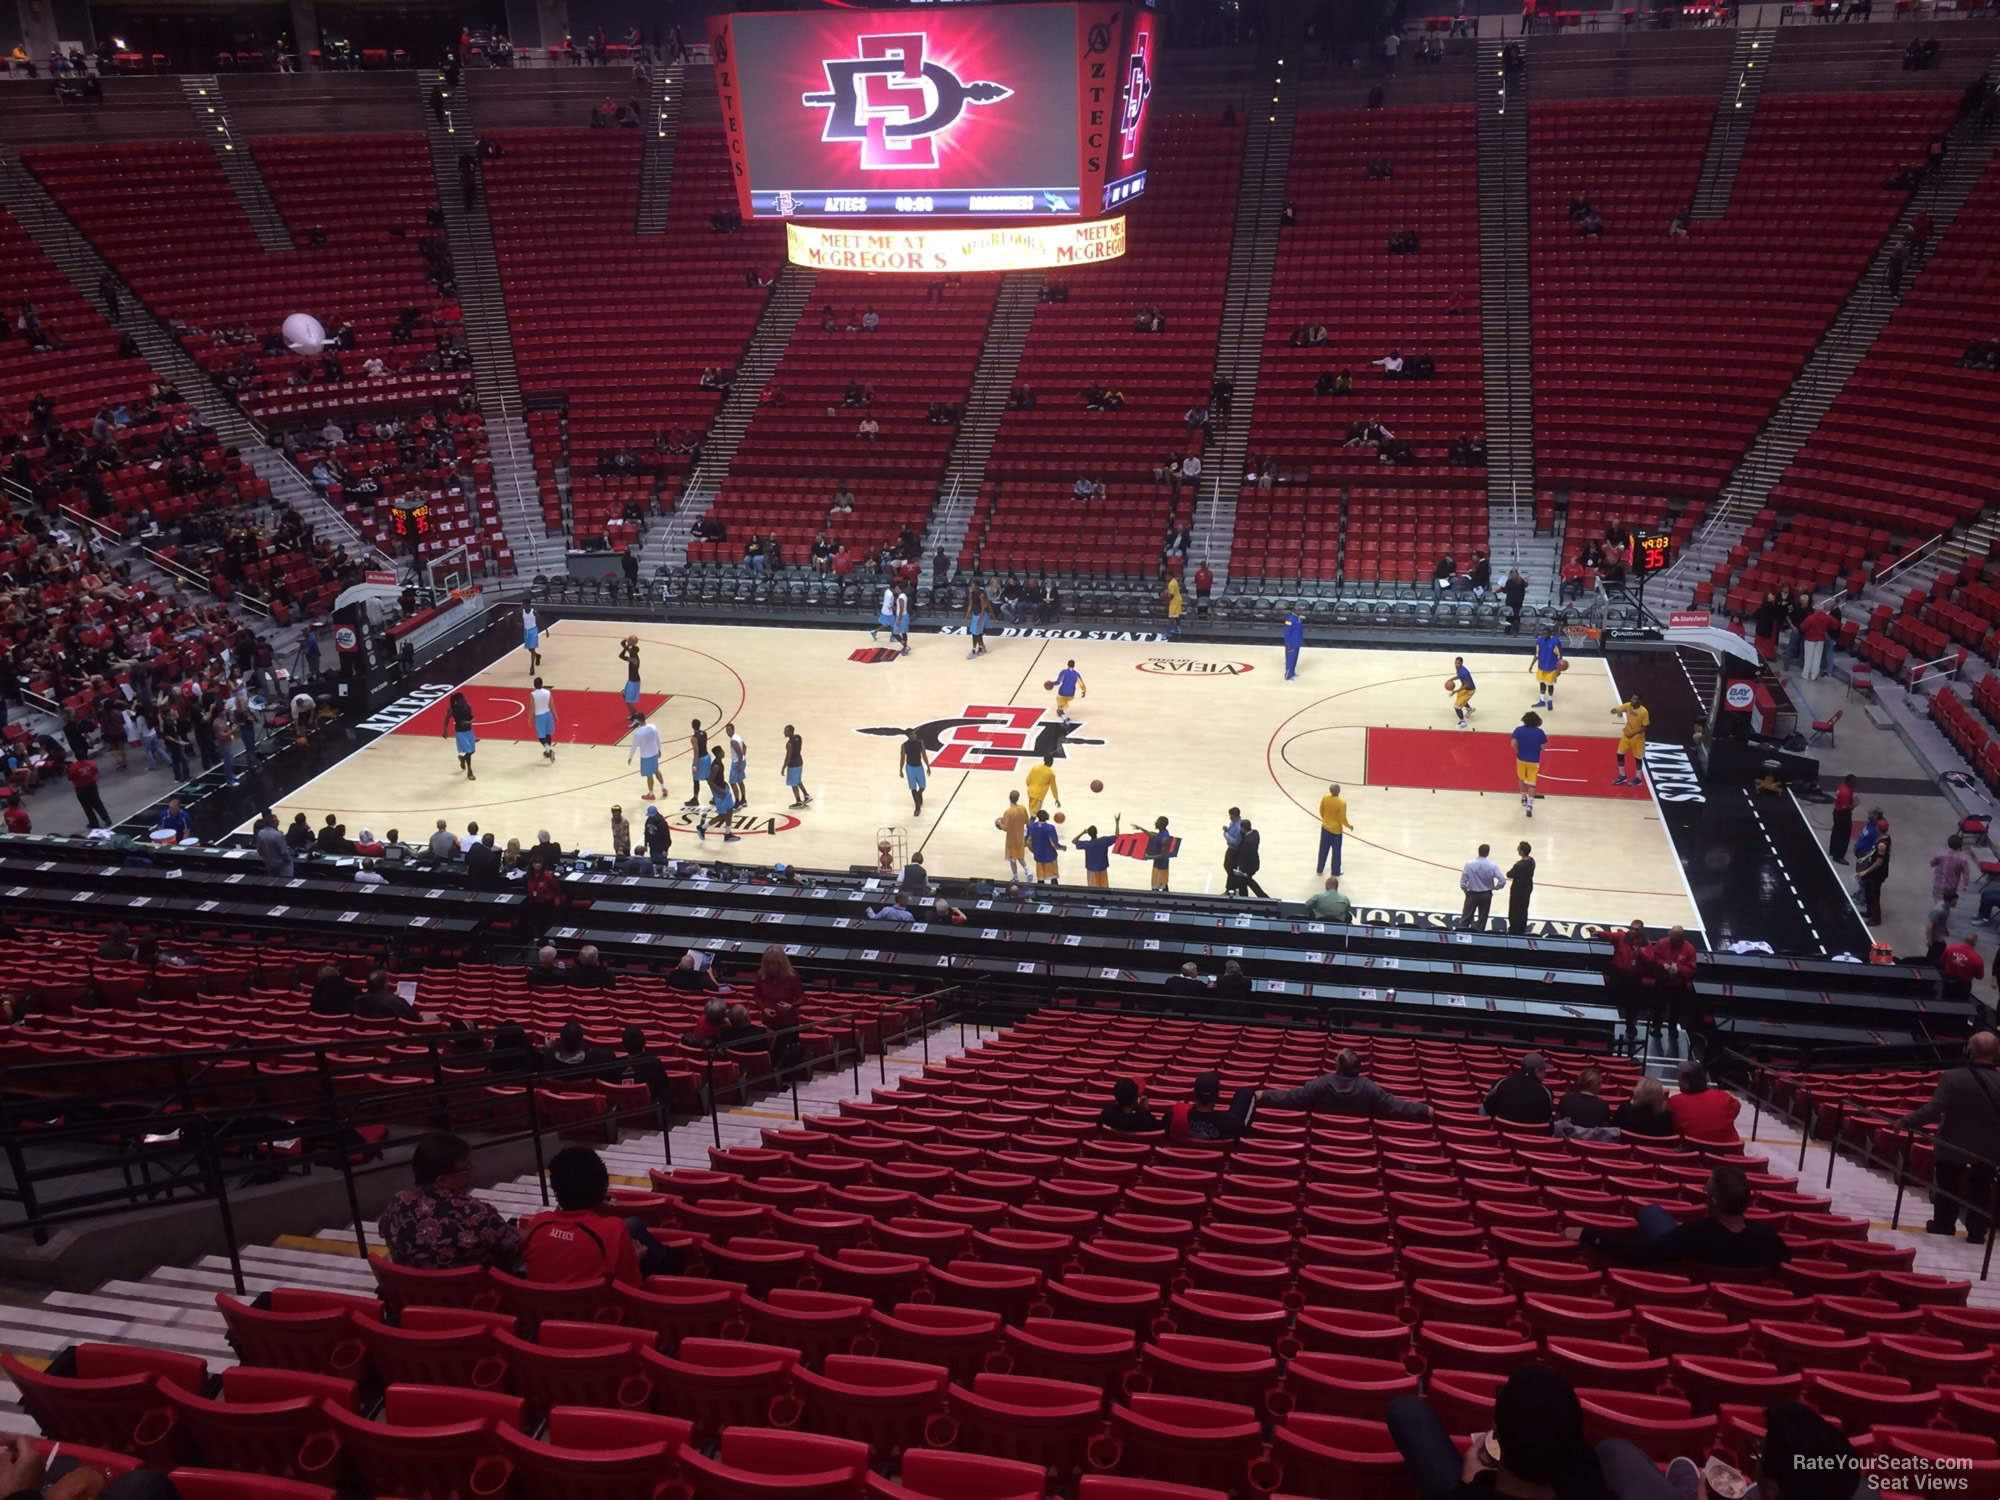 section s, row 30 seat view  - viejas arena